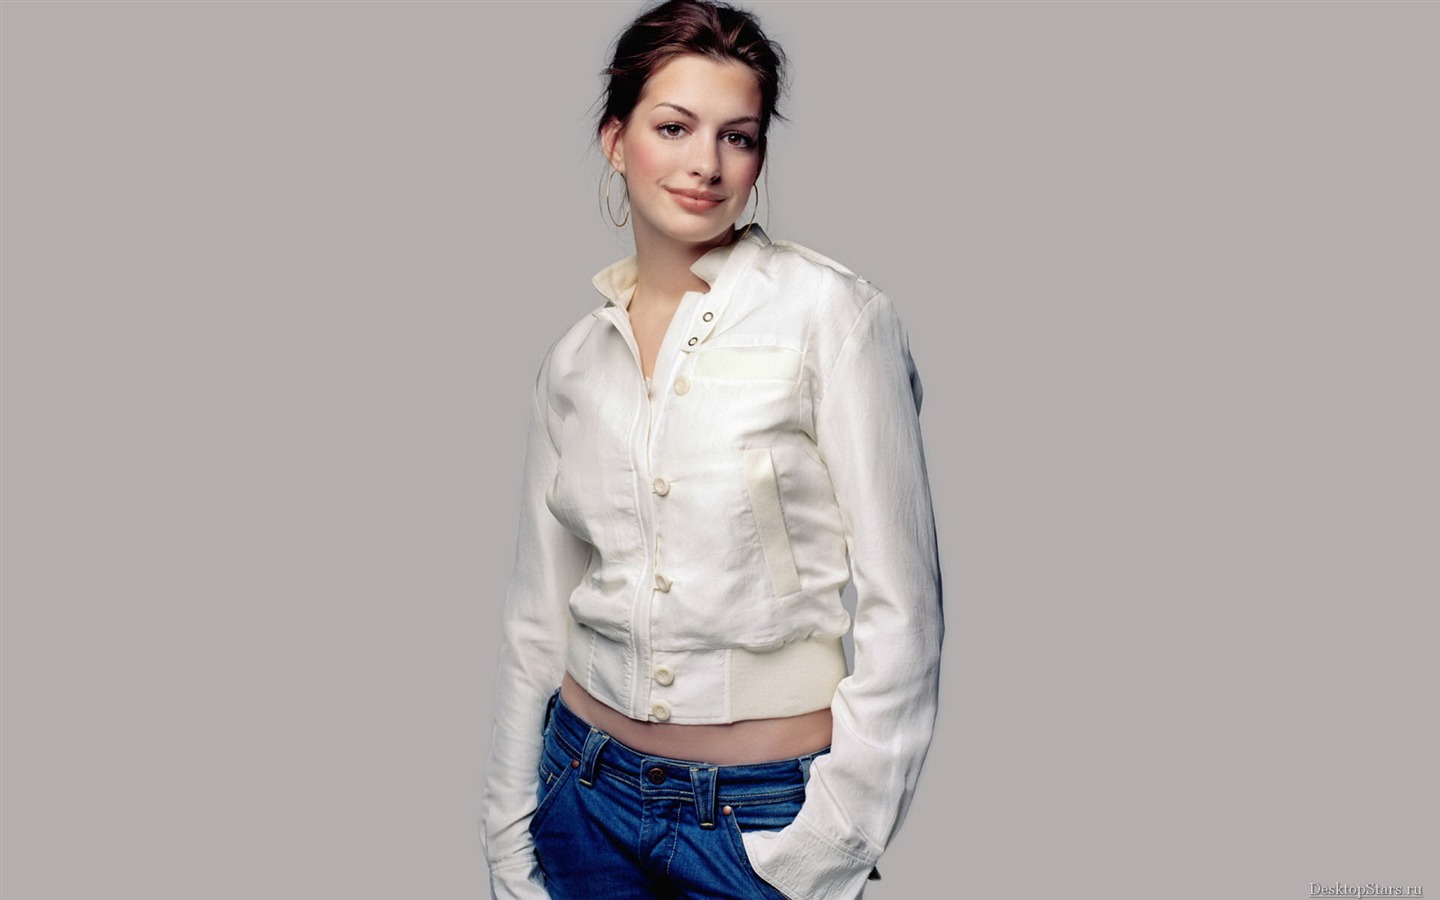 Anne Hathaway #015 - 1440x900 Wallpapers Pictures Photos Images